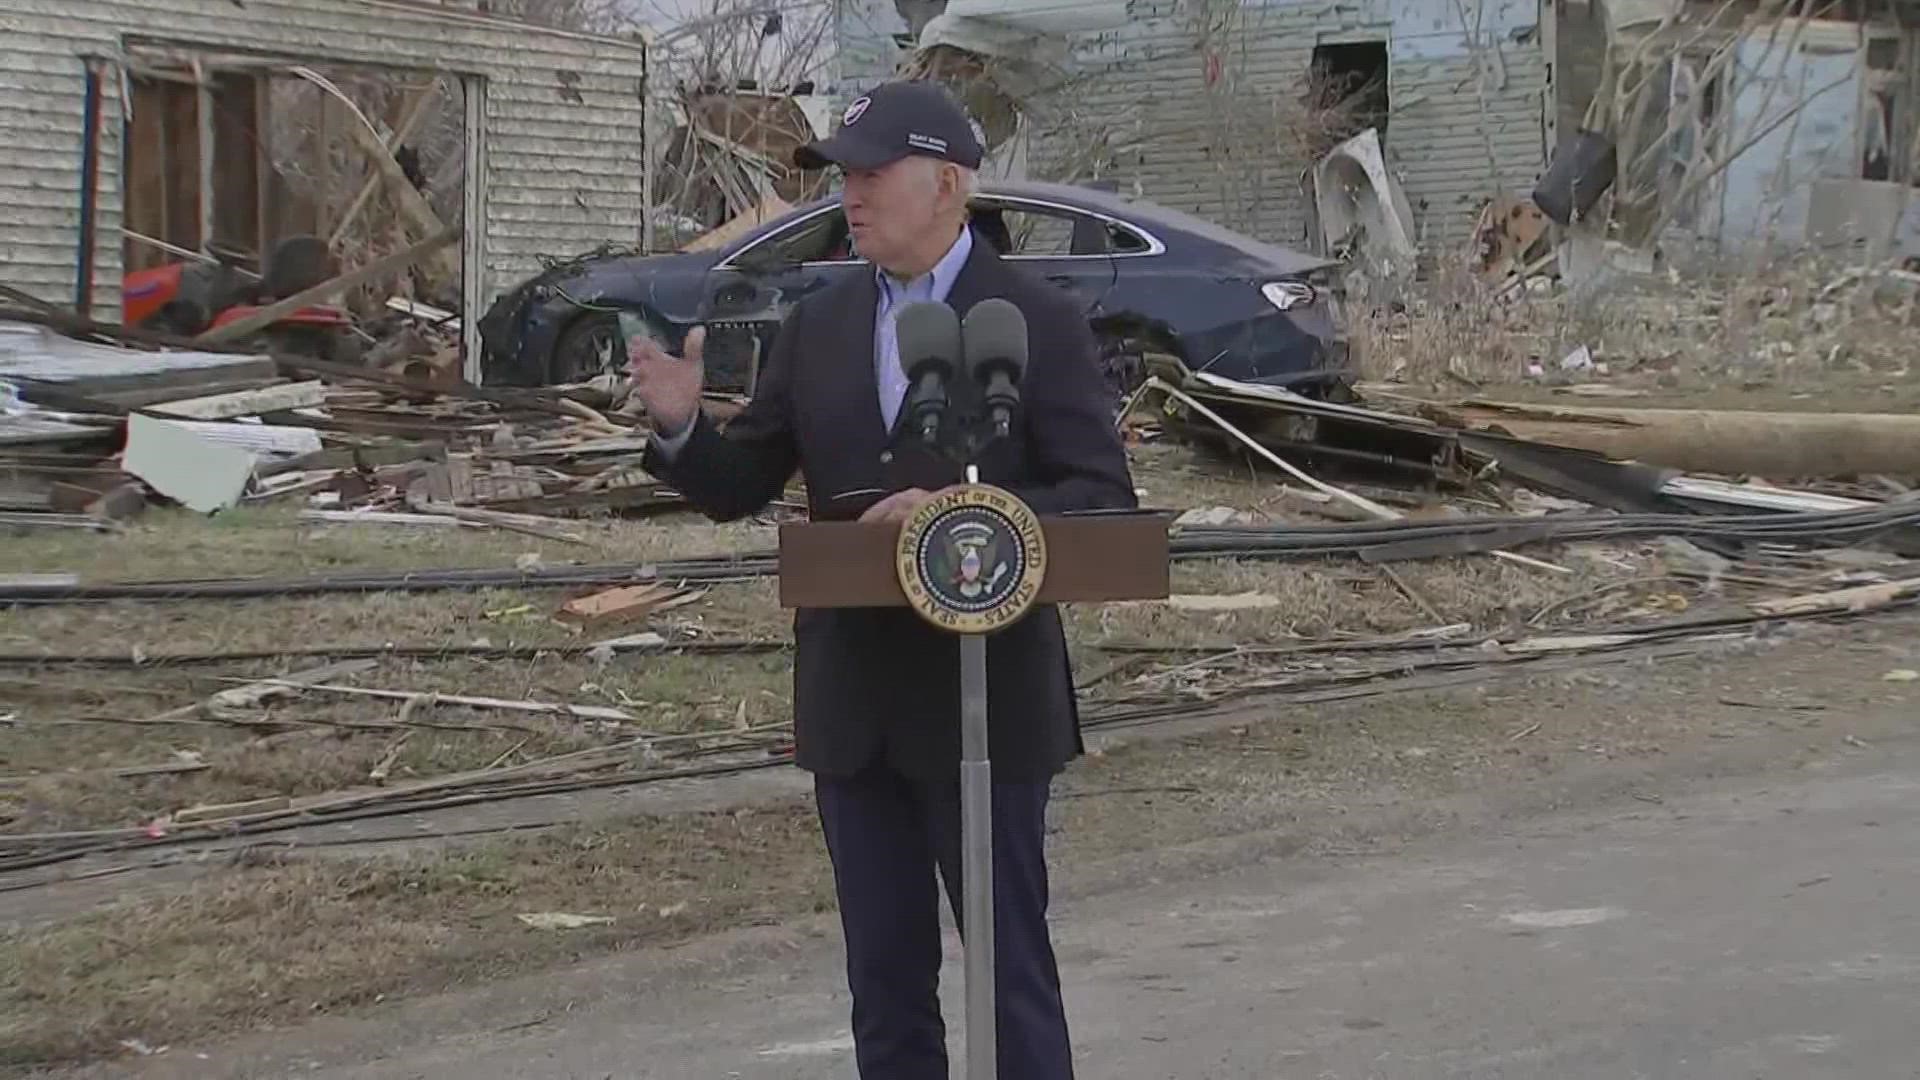 During his visit to Kentucky, Biden pledged that federal aid would continue to flow and described the tornado damage as some of the worst he had ever seen.